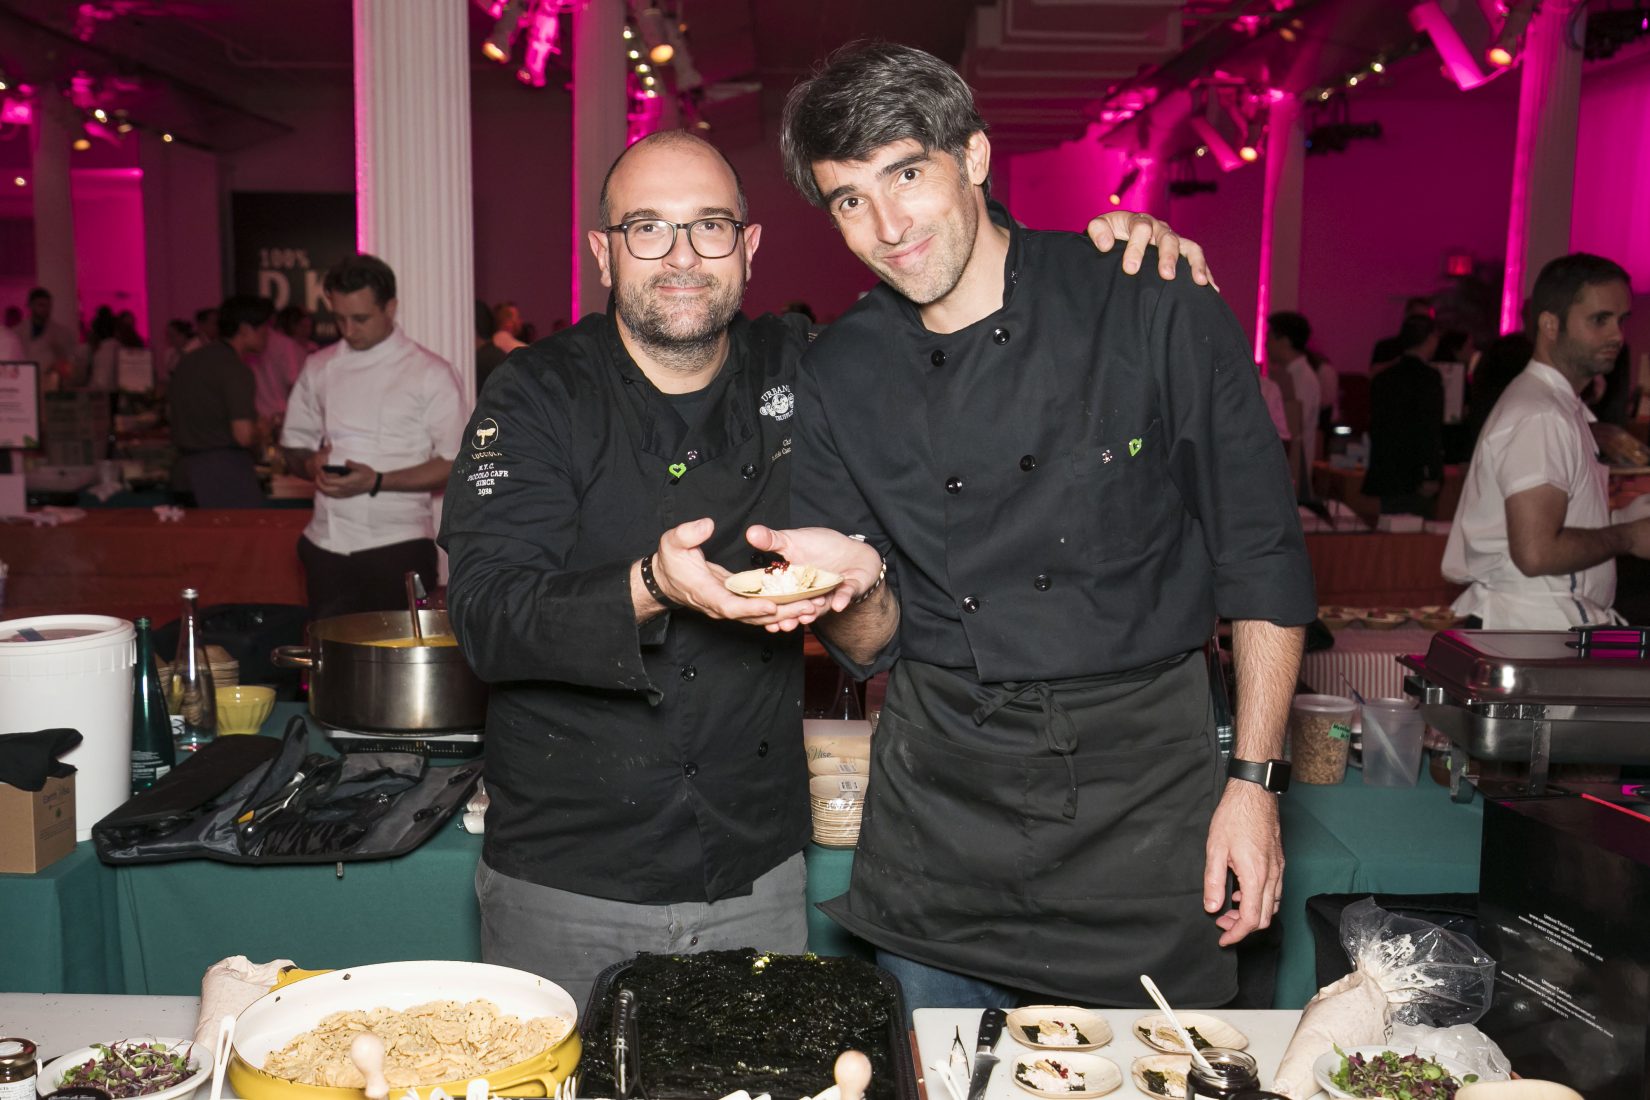 City Harvest’s “Summer in the City” Partners with Urbani Truffles